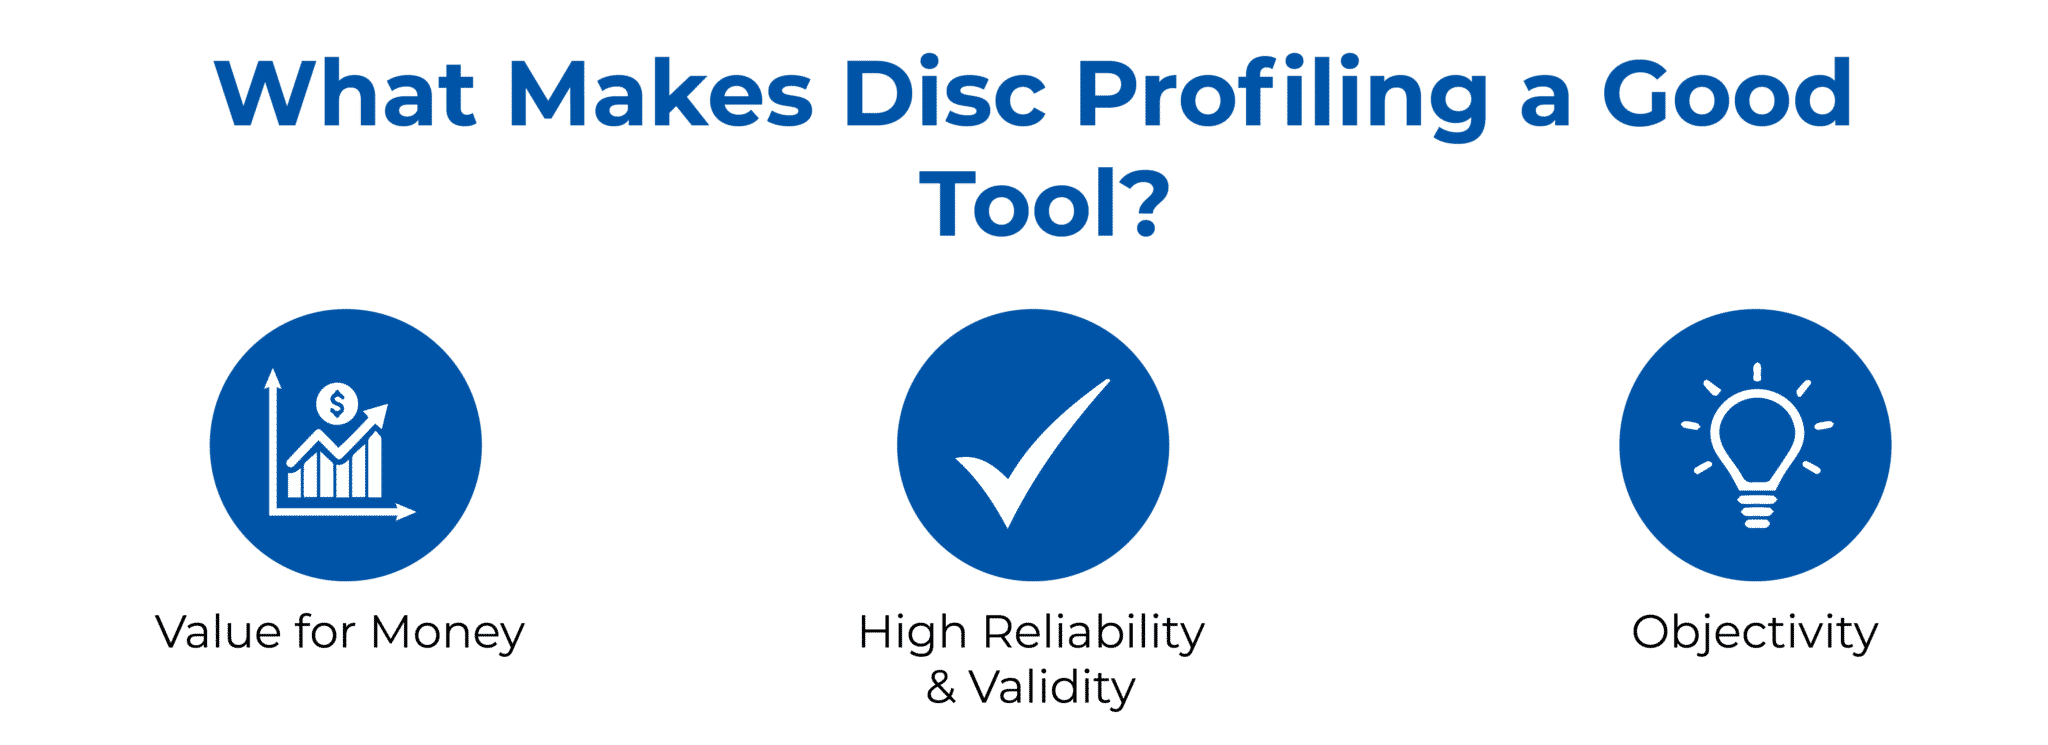 BENEFITS OF DiSC PROFILING AS A TOOL